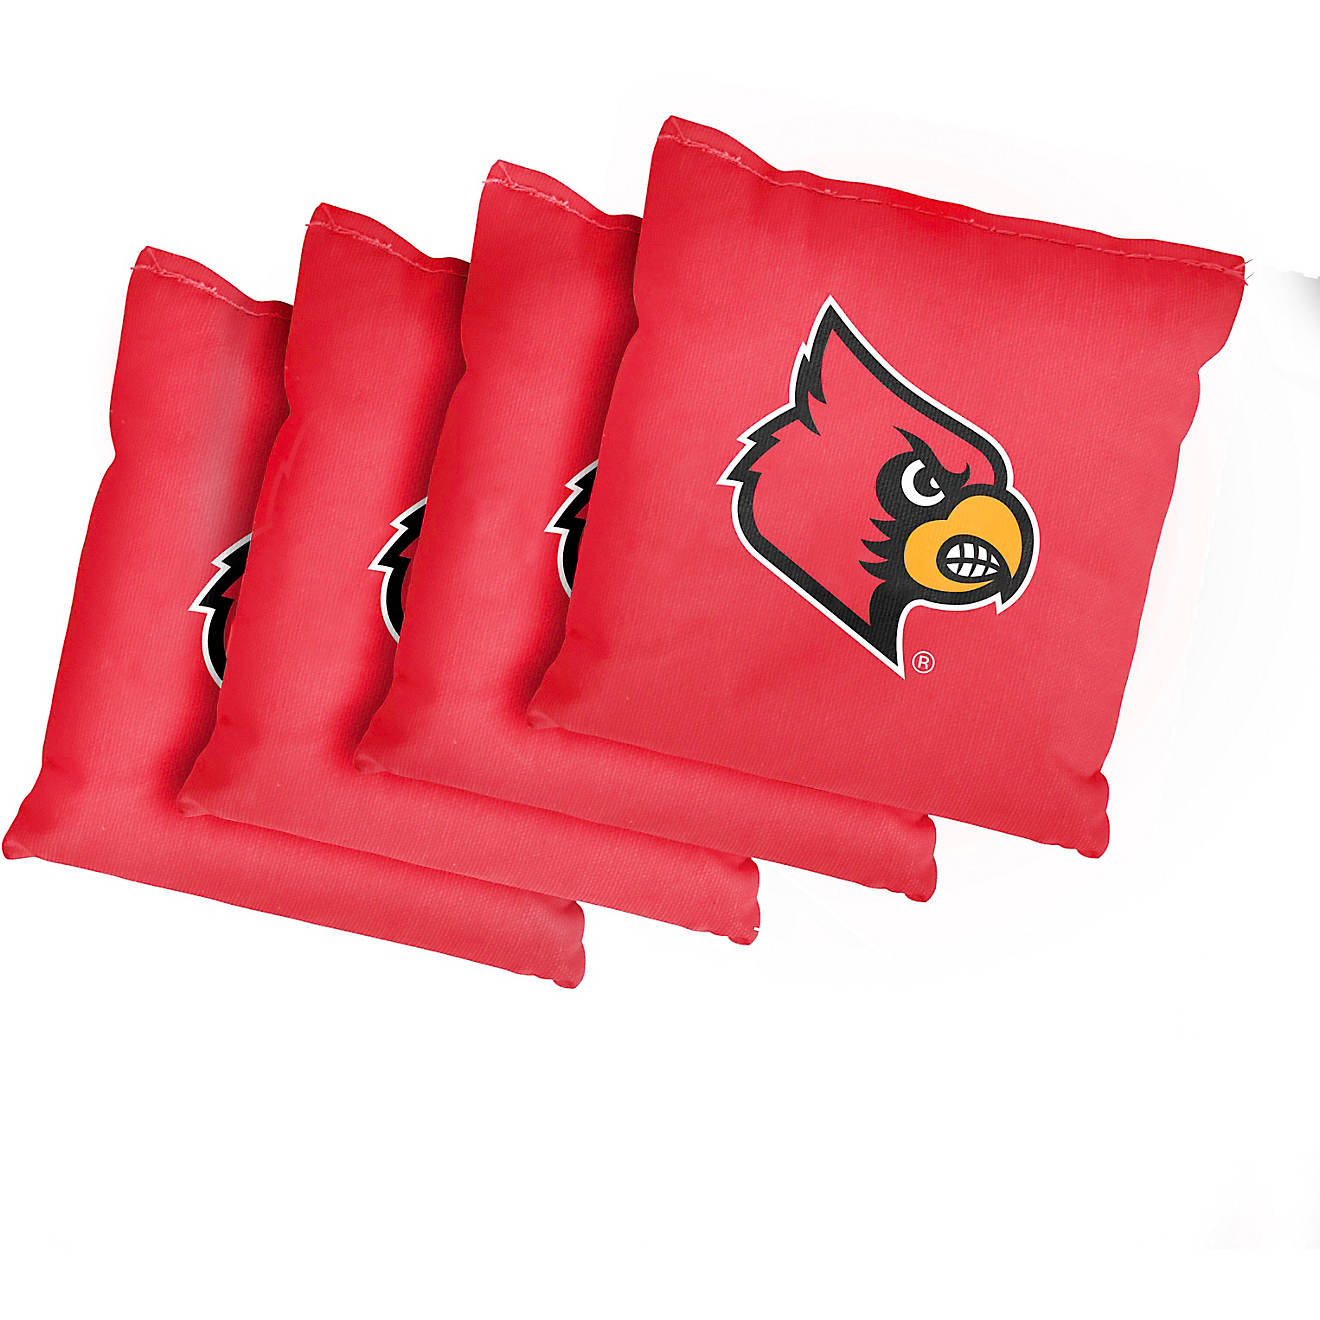 Victory Tailgate University of Louisville Cornhole Replacement Bean Bags 4-Pack                                                  - view number 1